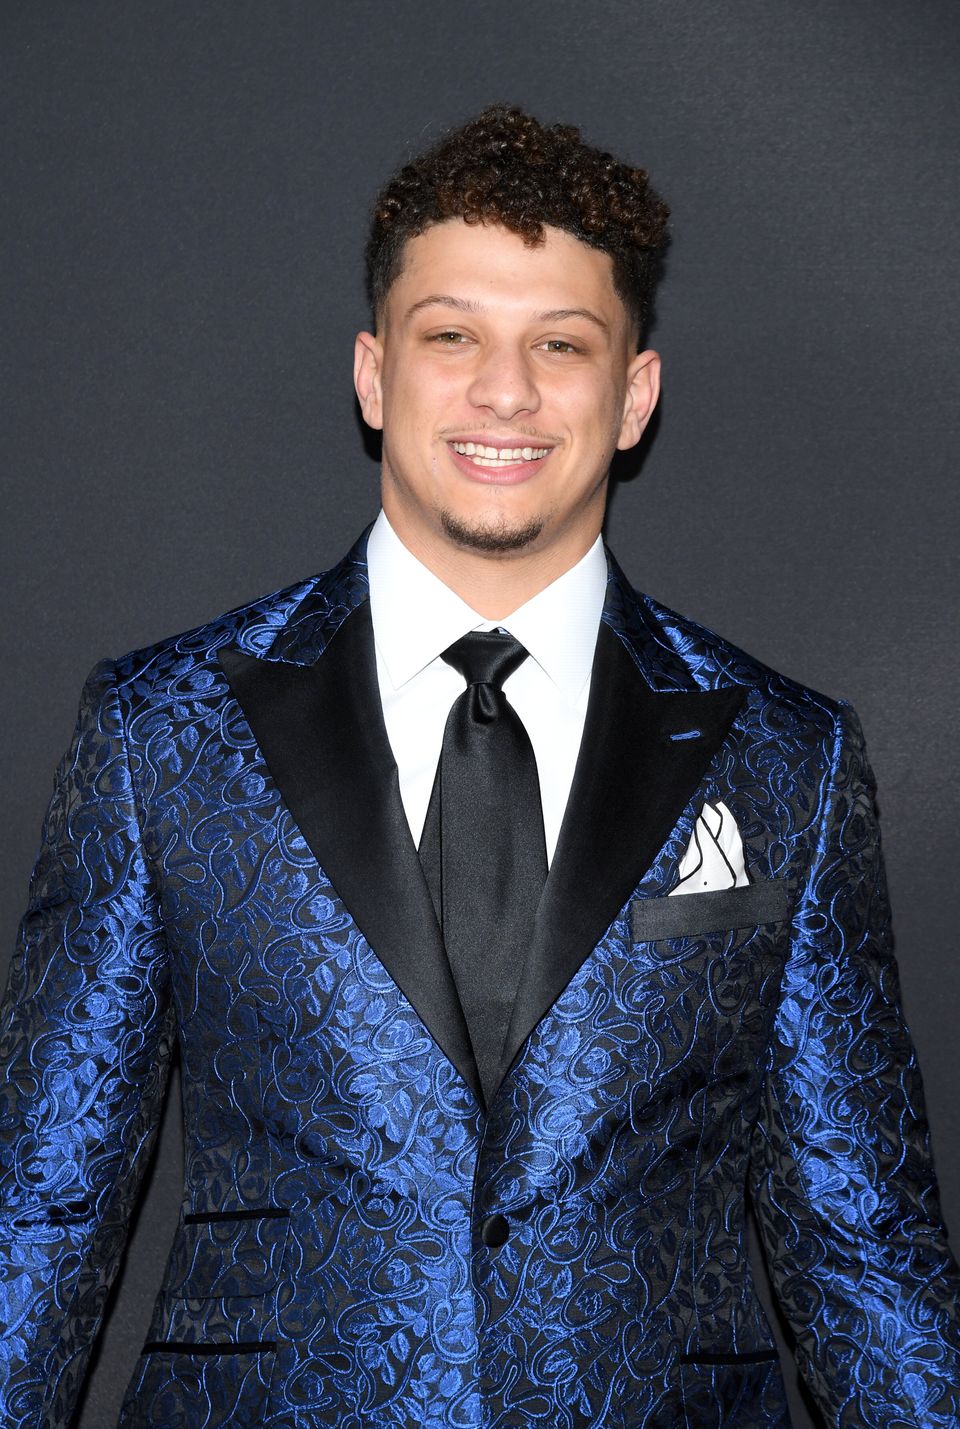 Patrick Mahomes' Deserted Teammate Embraces Change With a Stylish Haircut,  Marking the Beginning of an Exciting New Path - EssentiallySports